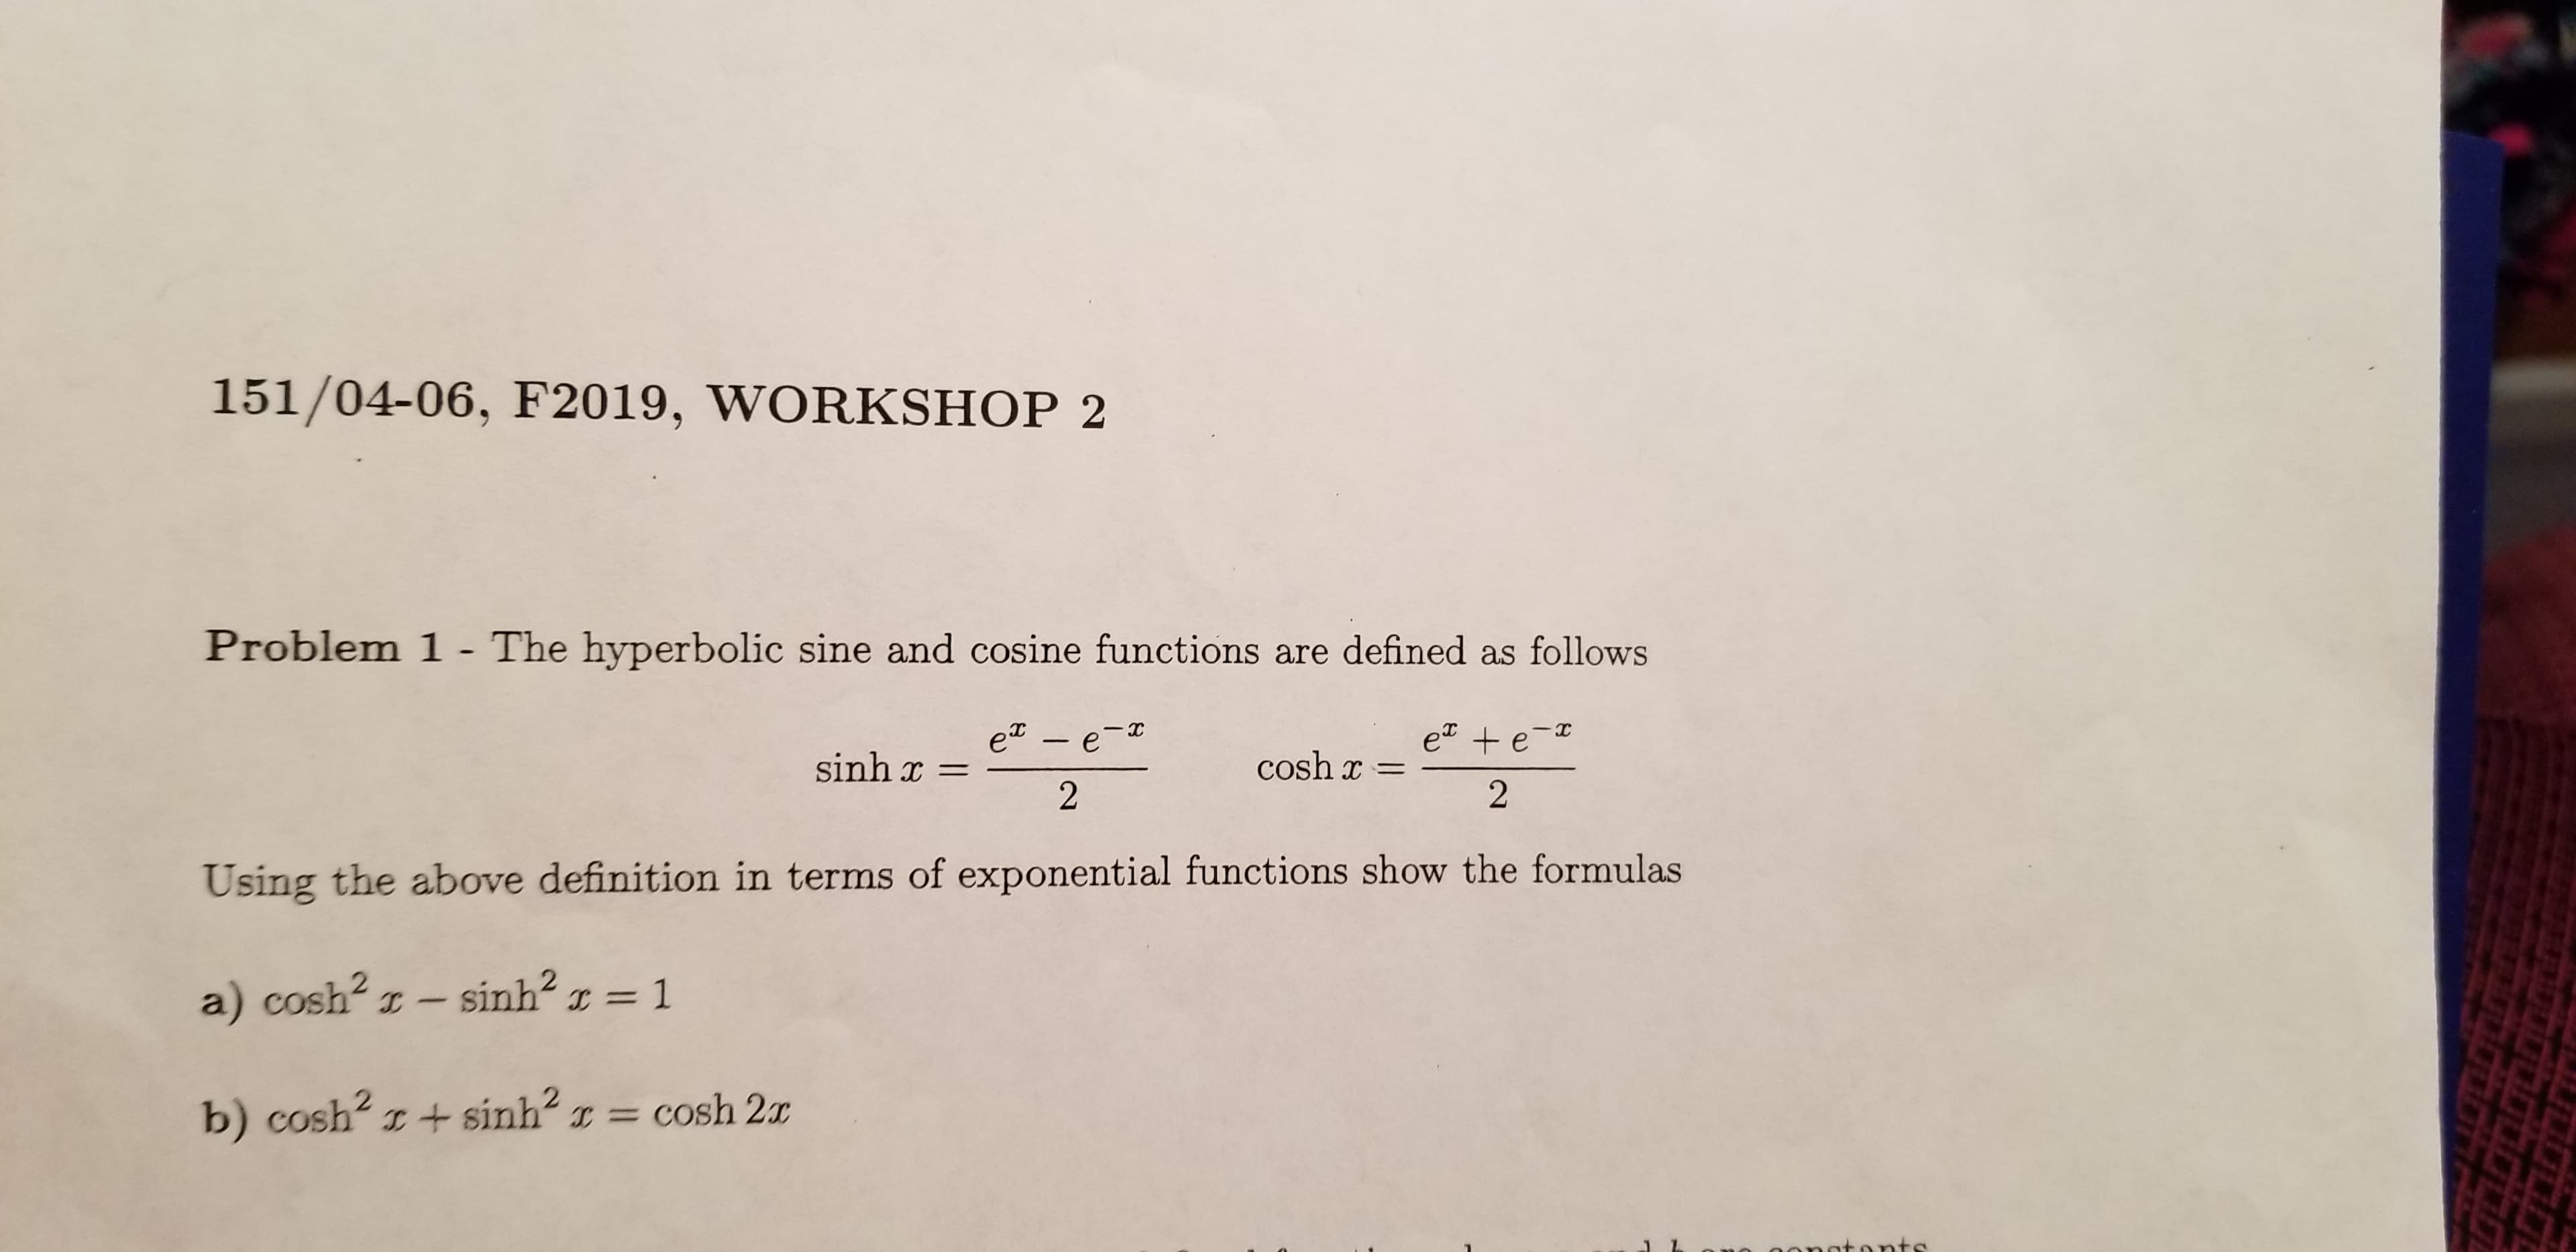 151/04-06, F2019, WORKSHOP 2
Problem 1 - The hyperbolic sine and cosine functions are defined as follows
e + e-
2
e - e-
sinh x
cosh
2
Using the above definition in terms of exponential functions show the formulas
a) cosh2 z- sinh2
1
C =
IC
CO
= cosh 2x
b) cosh2 I+sinh
tonts
